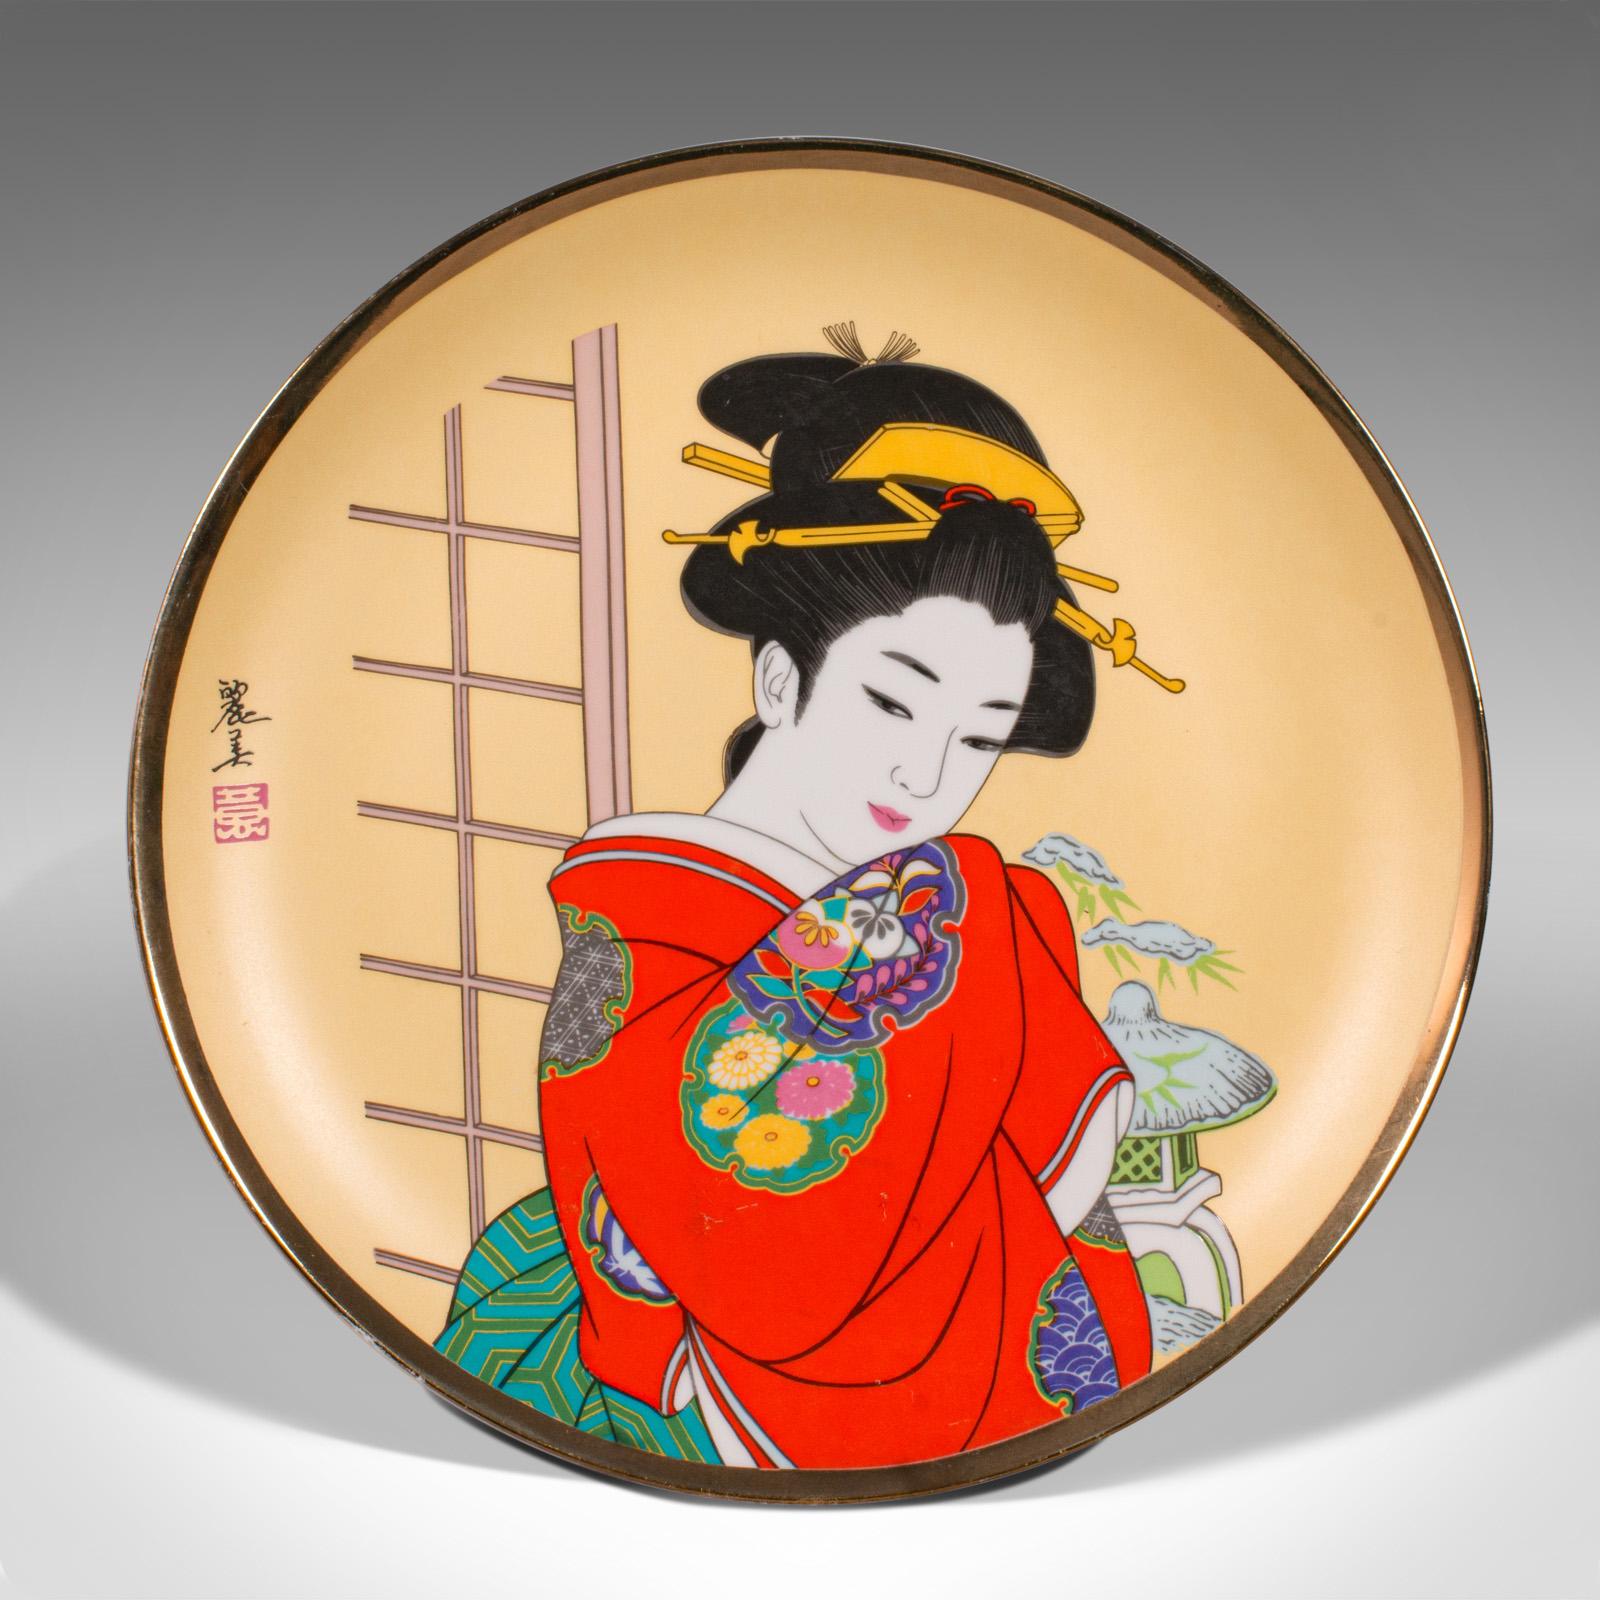 This is a vintage ukiyo-e display plate. A Japanese, ceramic decorative dish with Geisha figure, dating to the late 20th century, circa 1980.

Striking decorative plate with superb character and colour
Displaying a desirable aged patina and in good